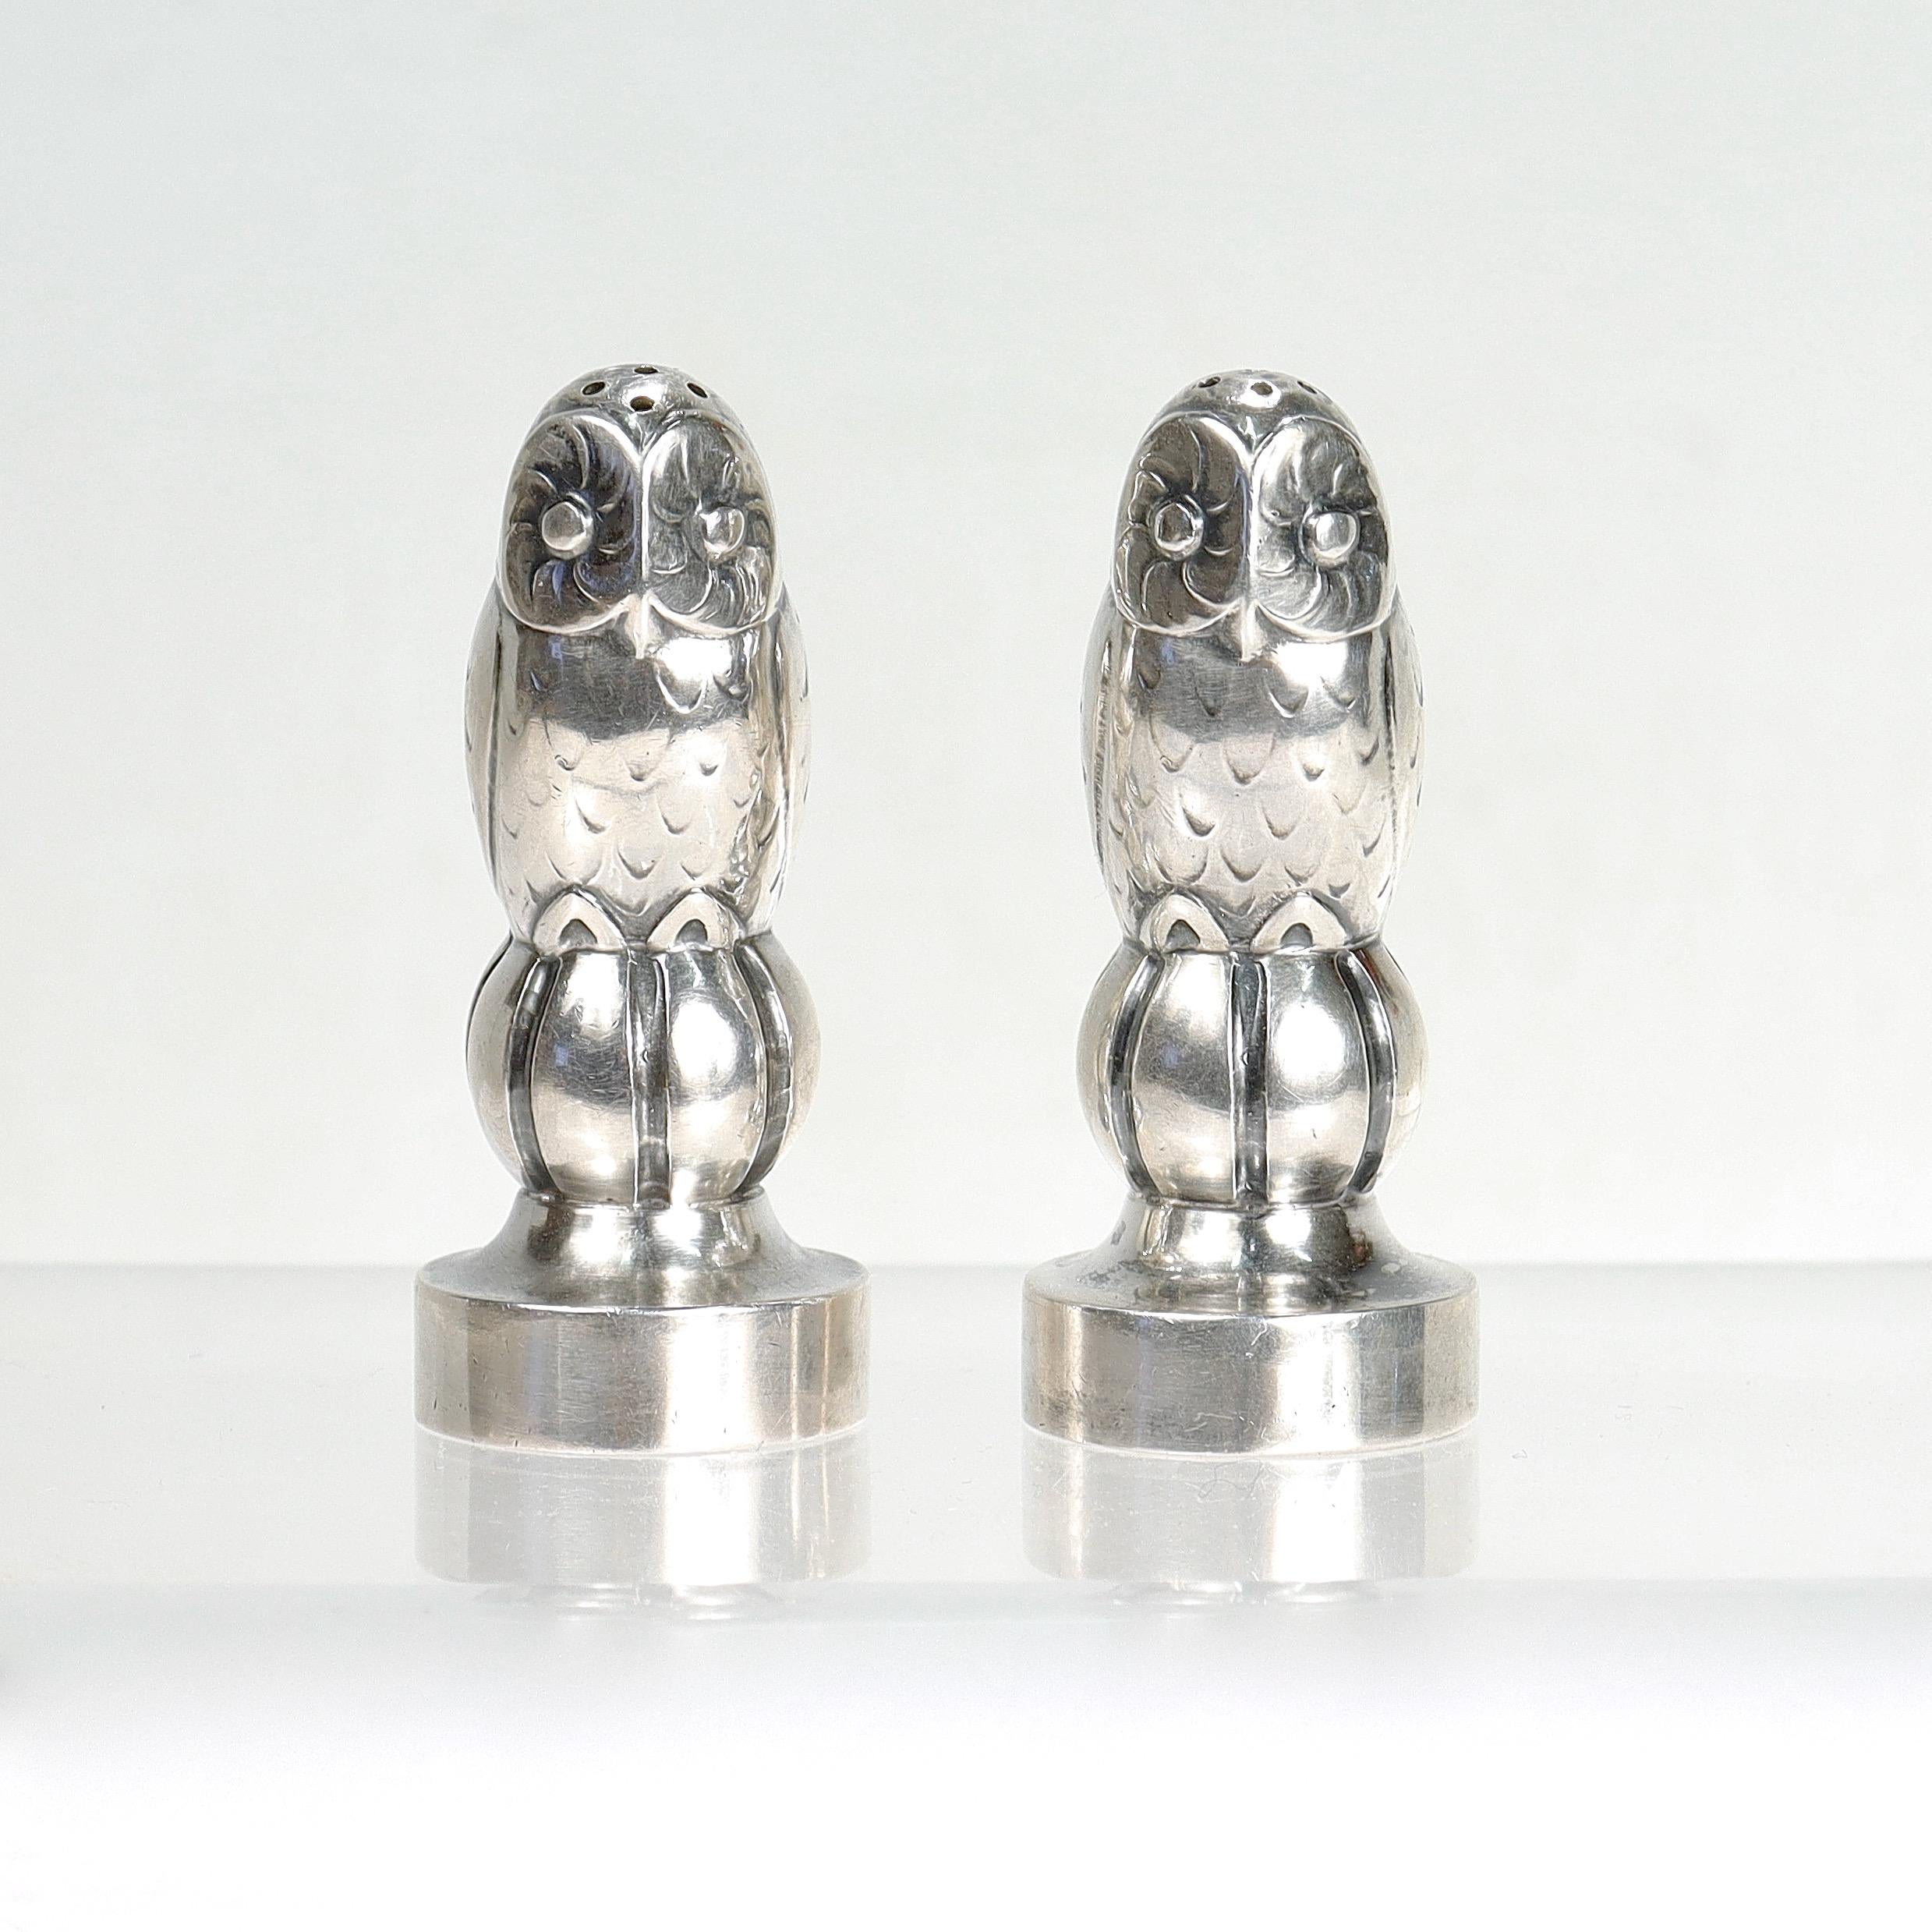 A fine pair of antique salt and pepper shakers.

By Georg Jensen. 

In sterling silver.

Model. no. 36.

Designed by Georg Jensen.

Each modeled as an owl perched on a ribbed ball supported by an everted foot. 

One with a replaced foot cap.

Each